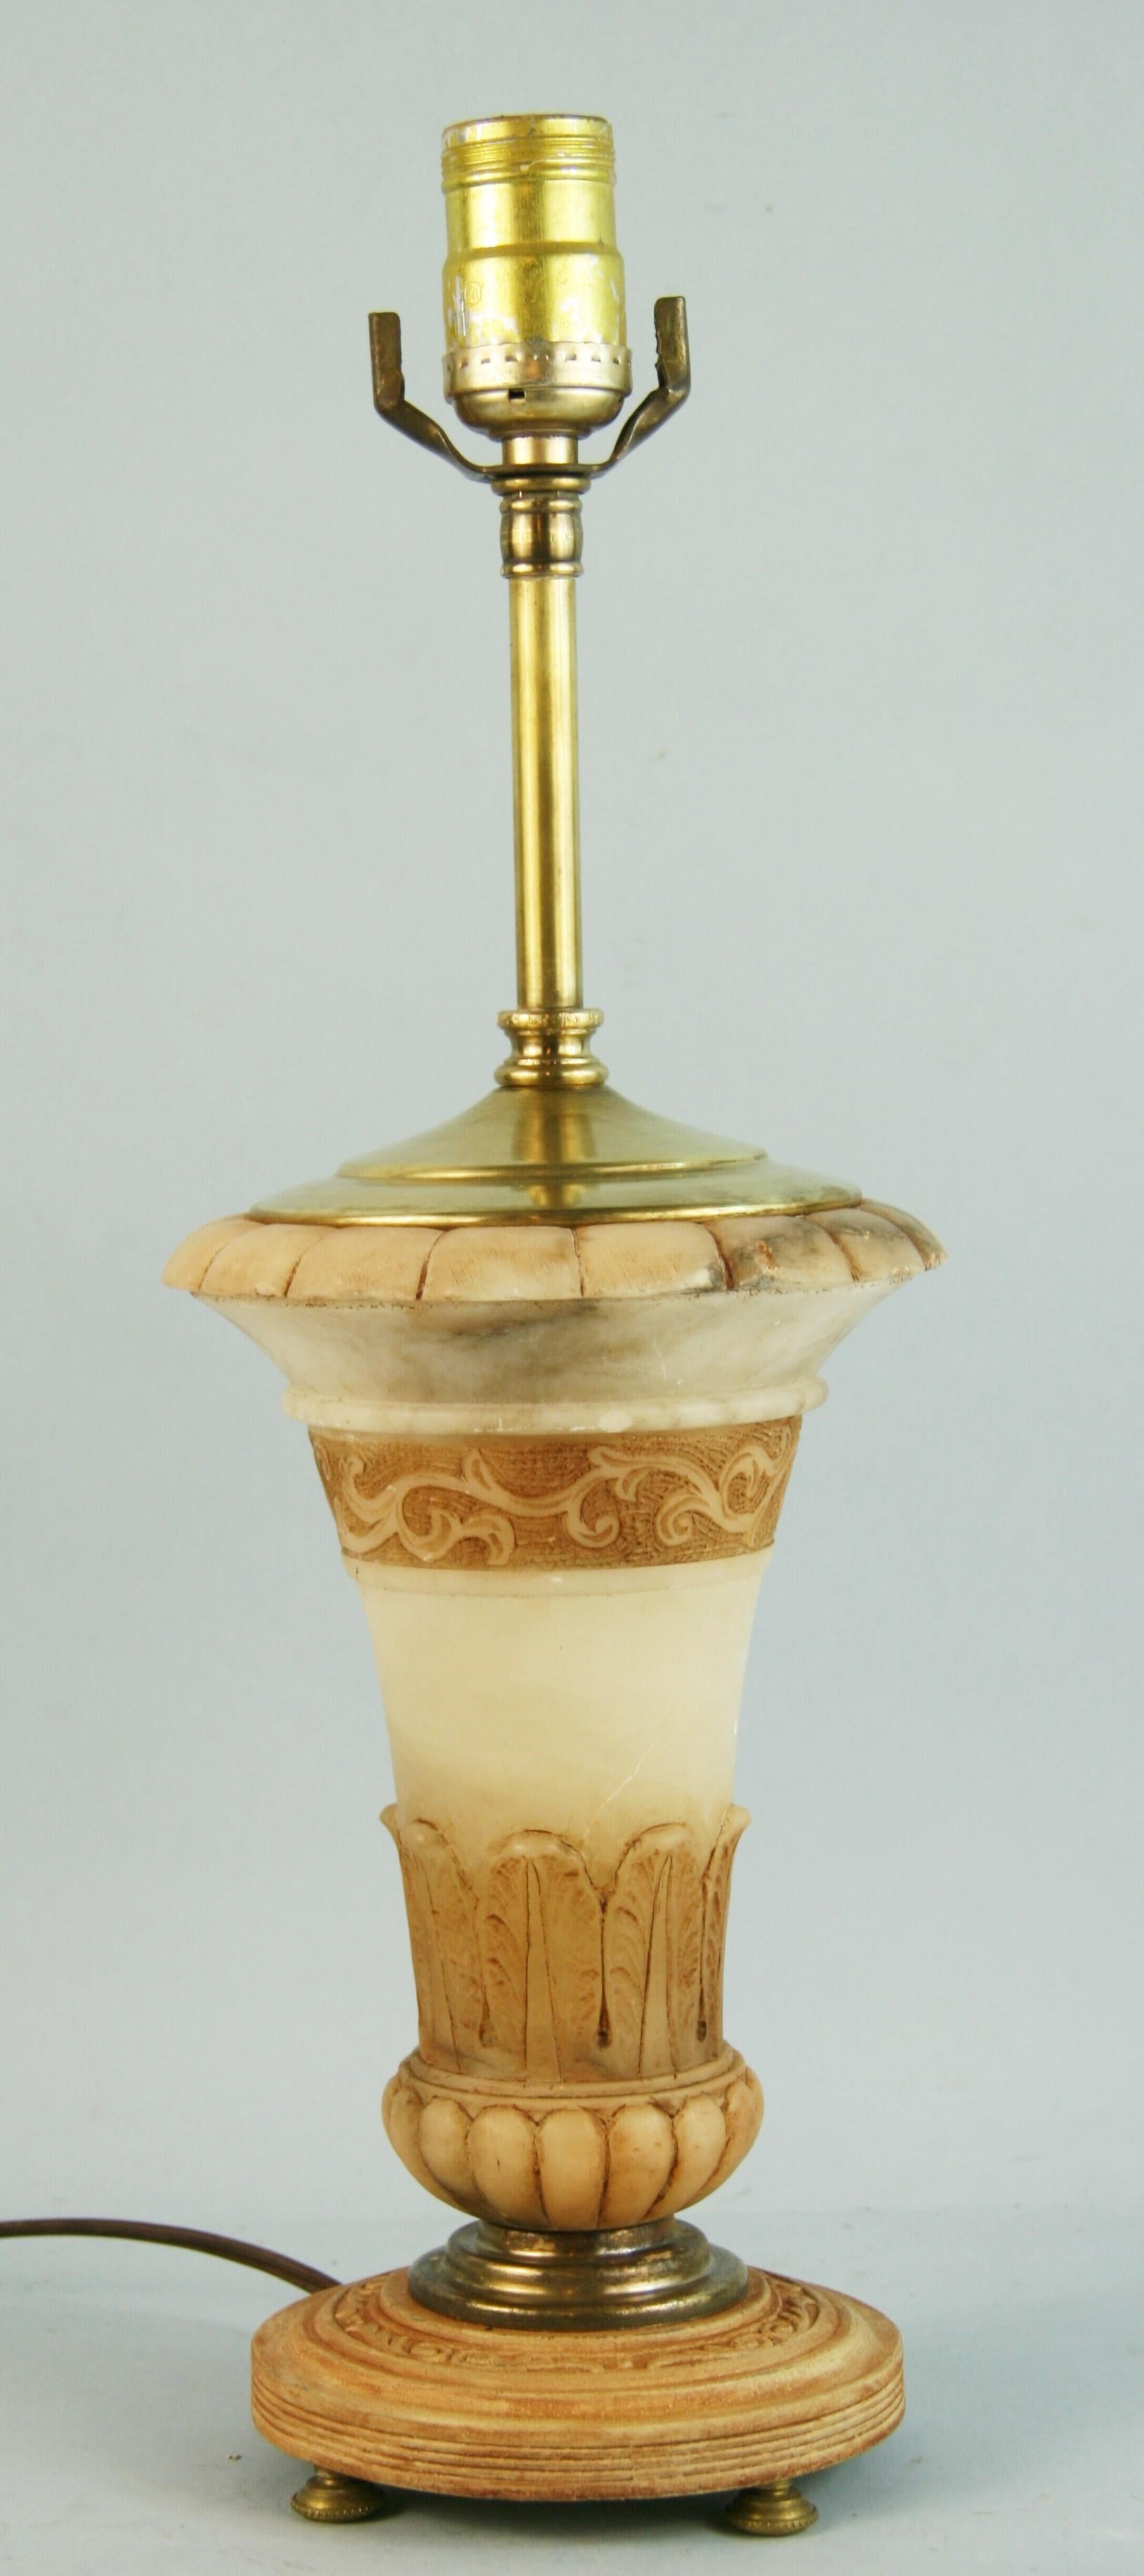 3-750 Italian urn shaped alabaster lamp 
Height to top of urn 10